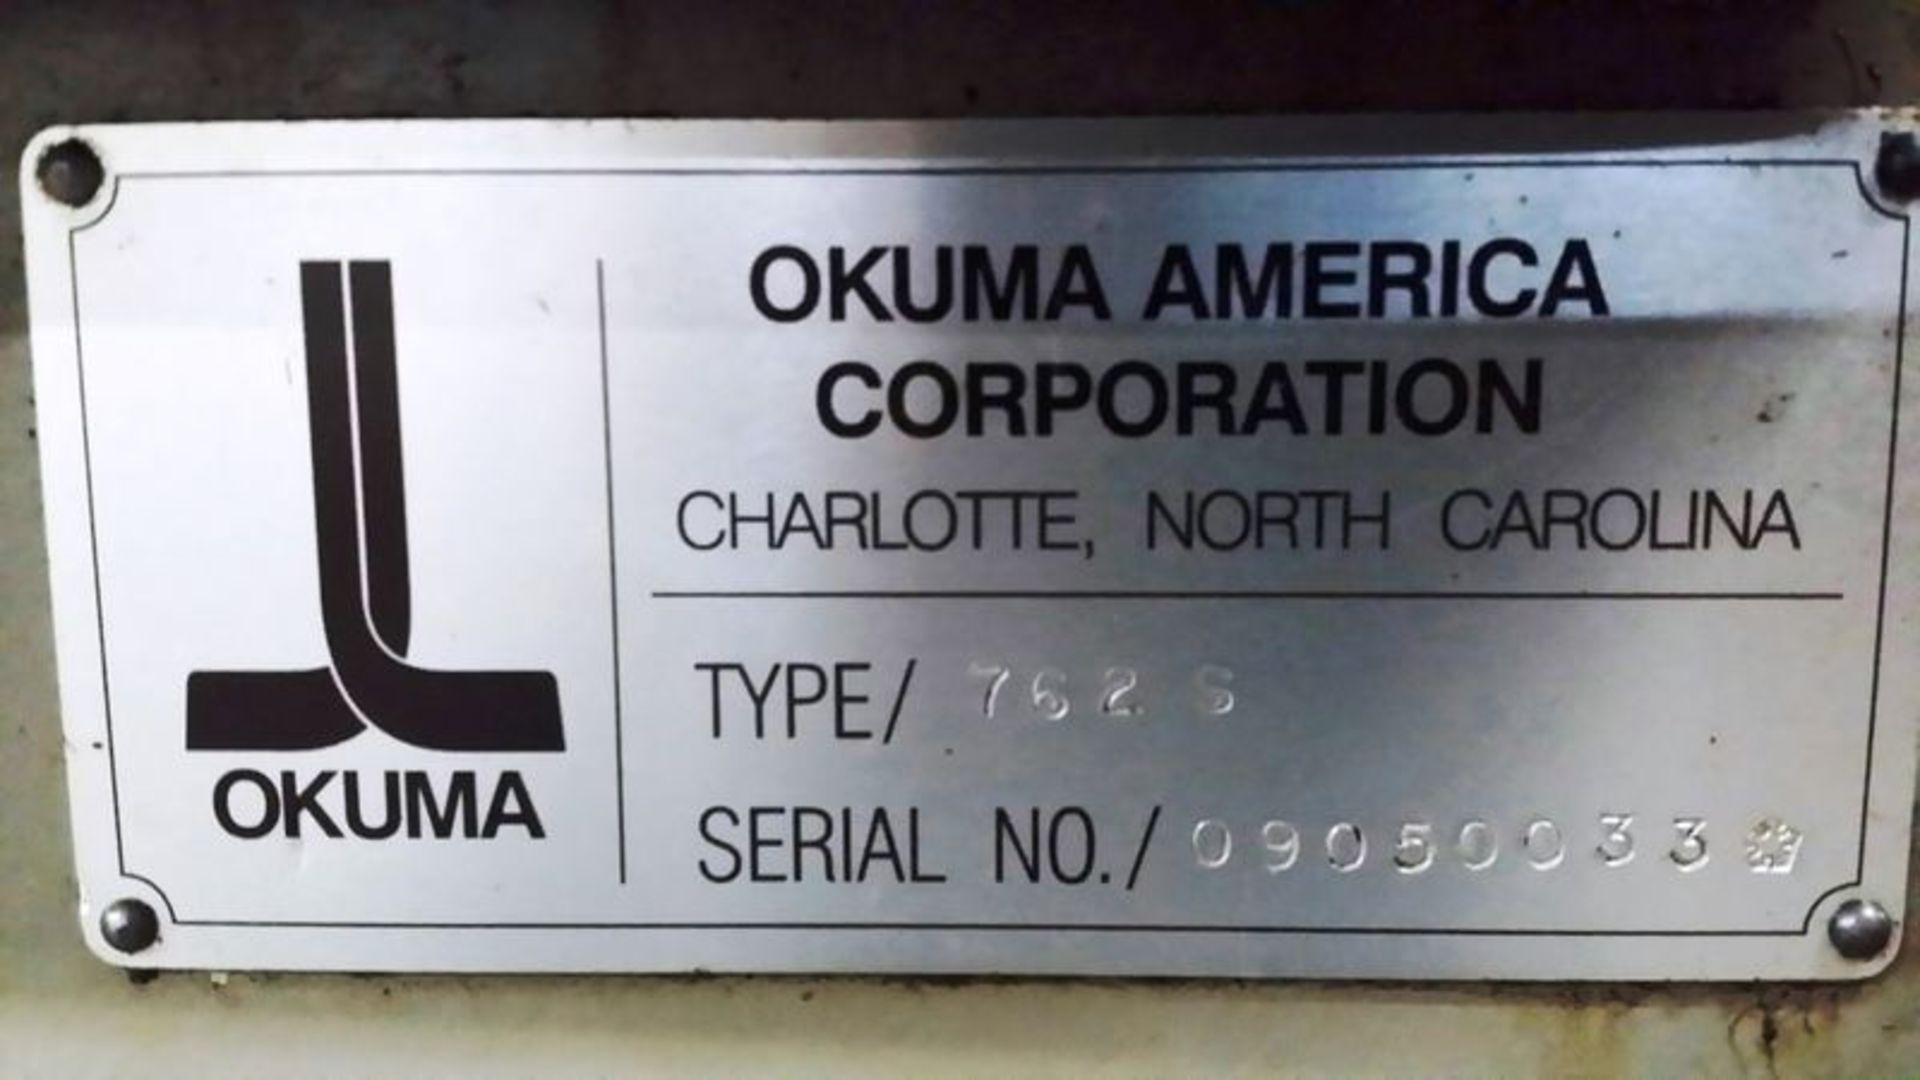 Okuma Crown-S762BB Big Bore 2-Axis CNC Turning Center, S/N 0033, New 1997 - Image 11 of 11